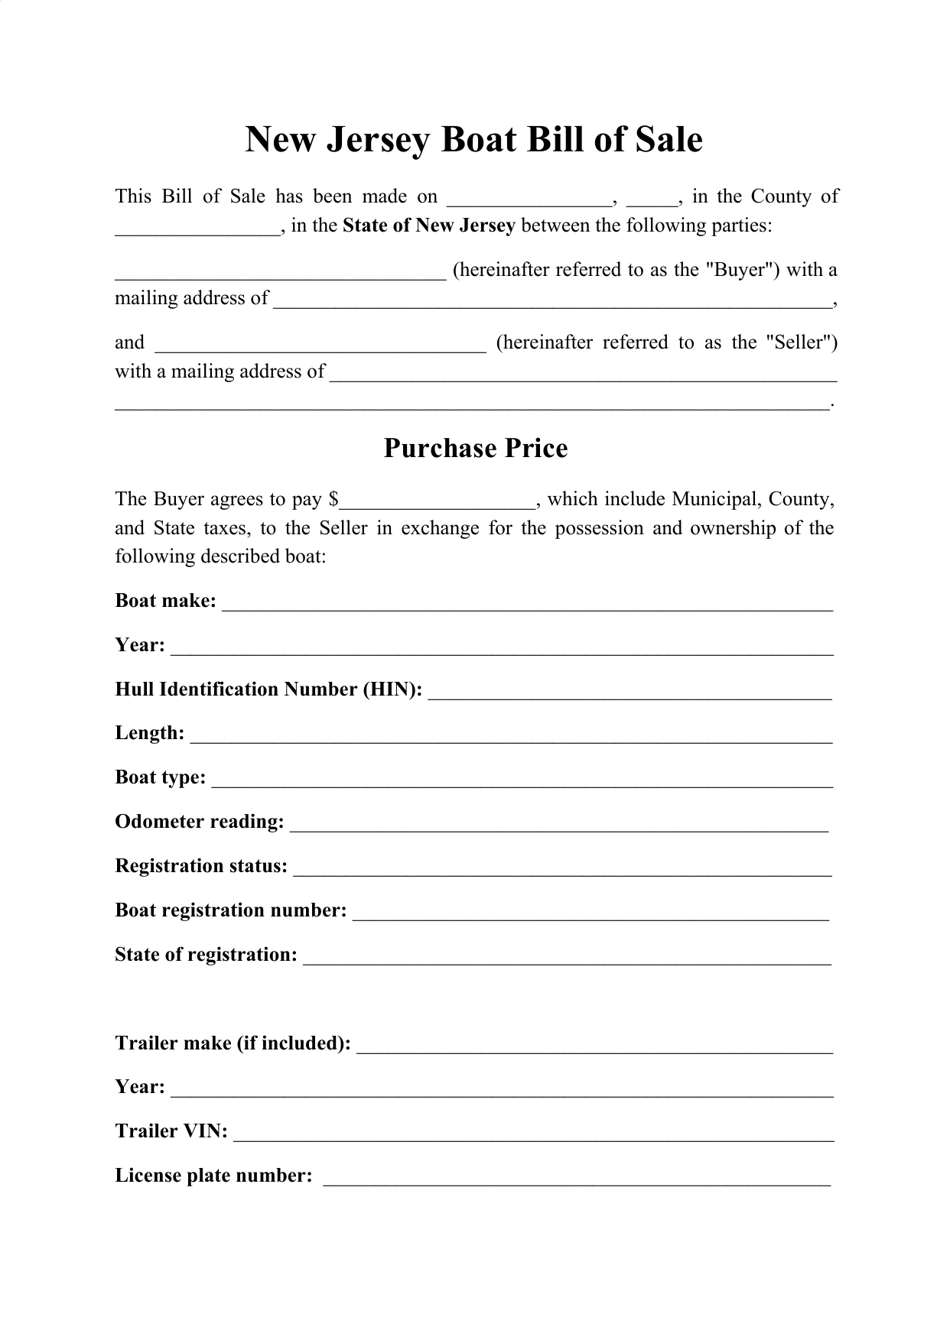 Bill Of Sale Template For A Boat